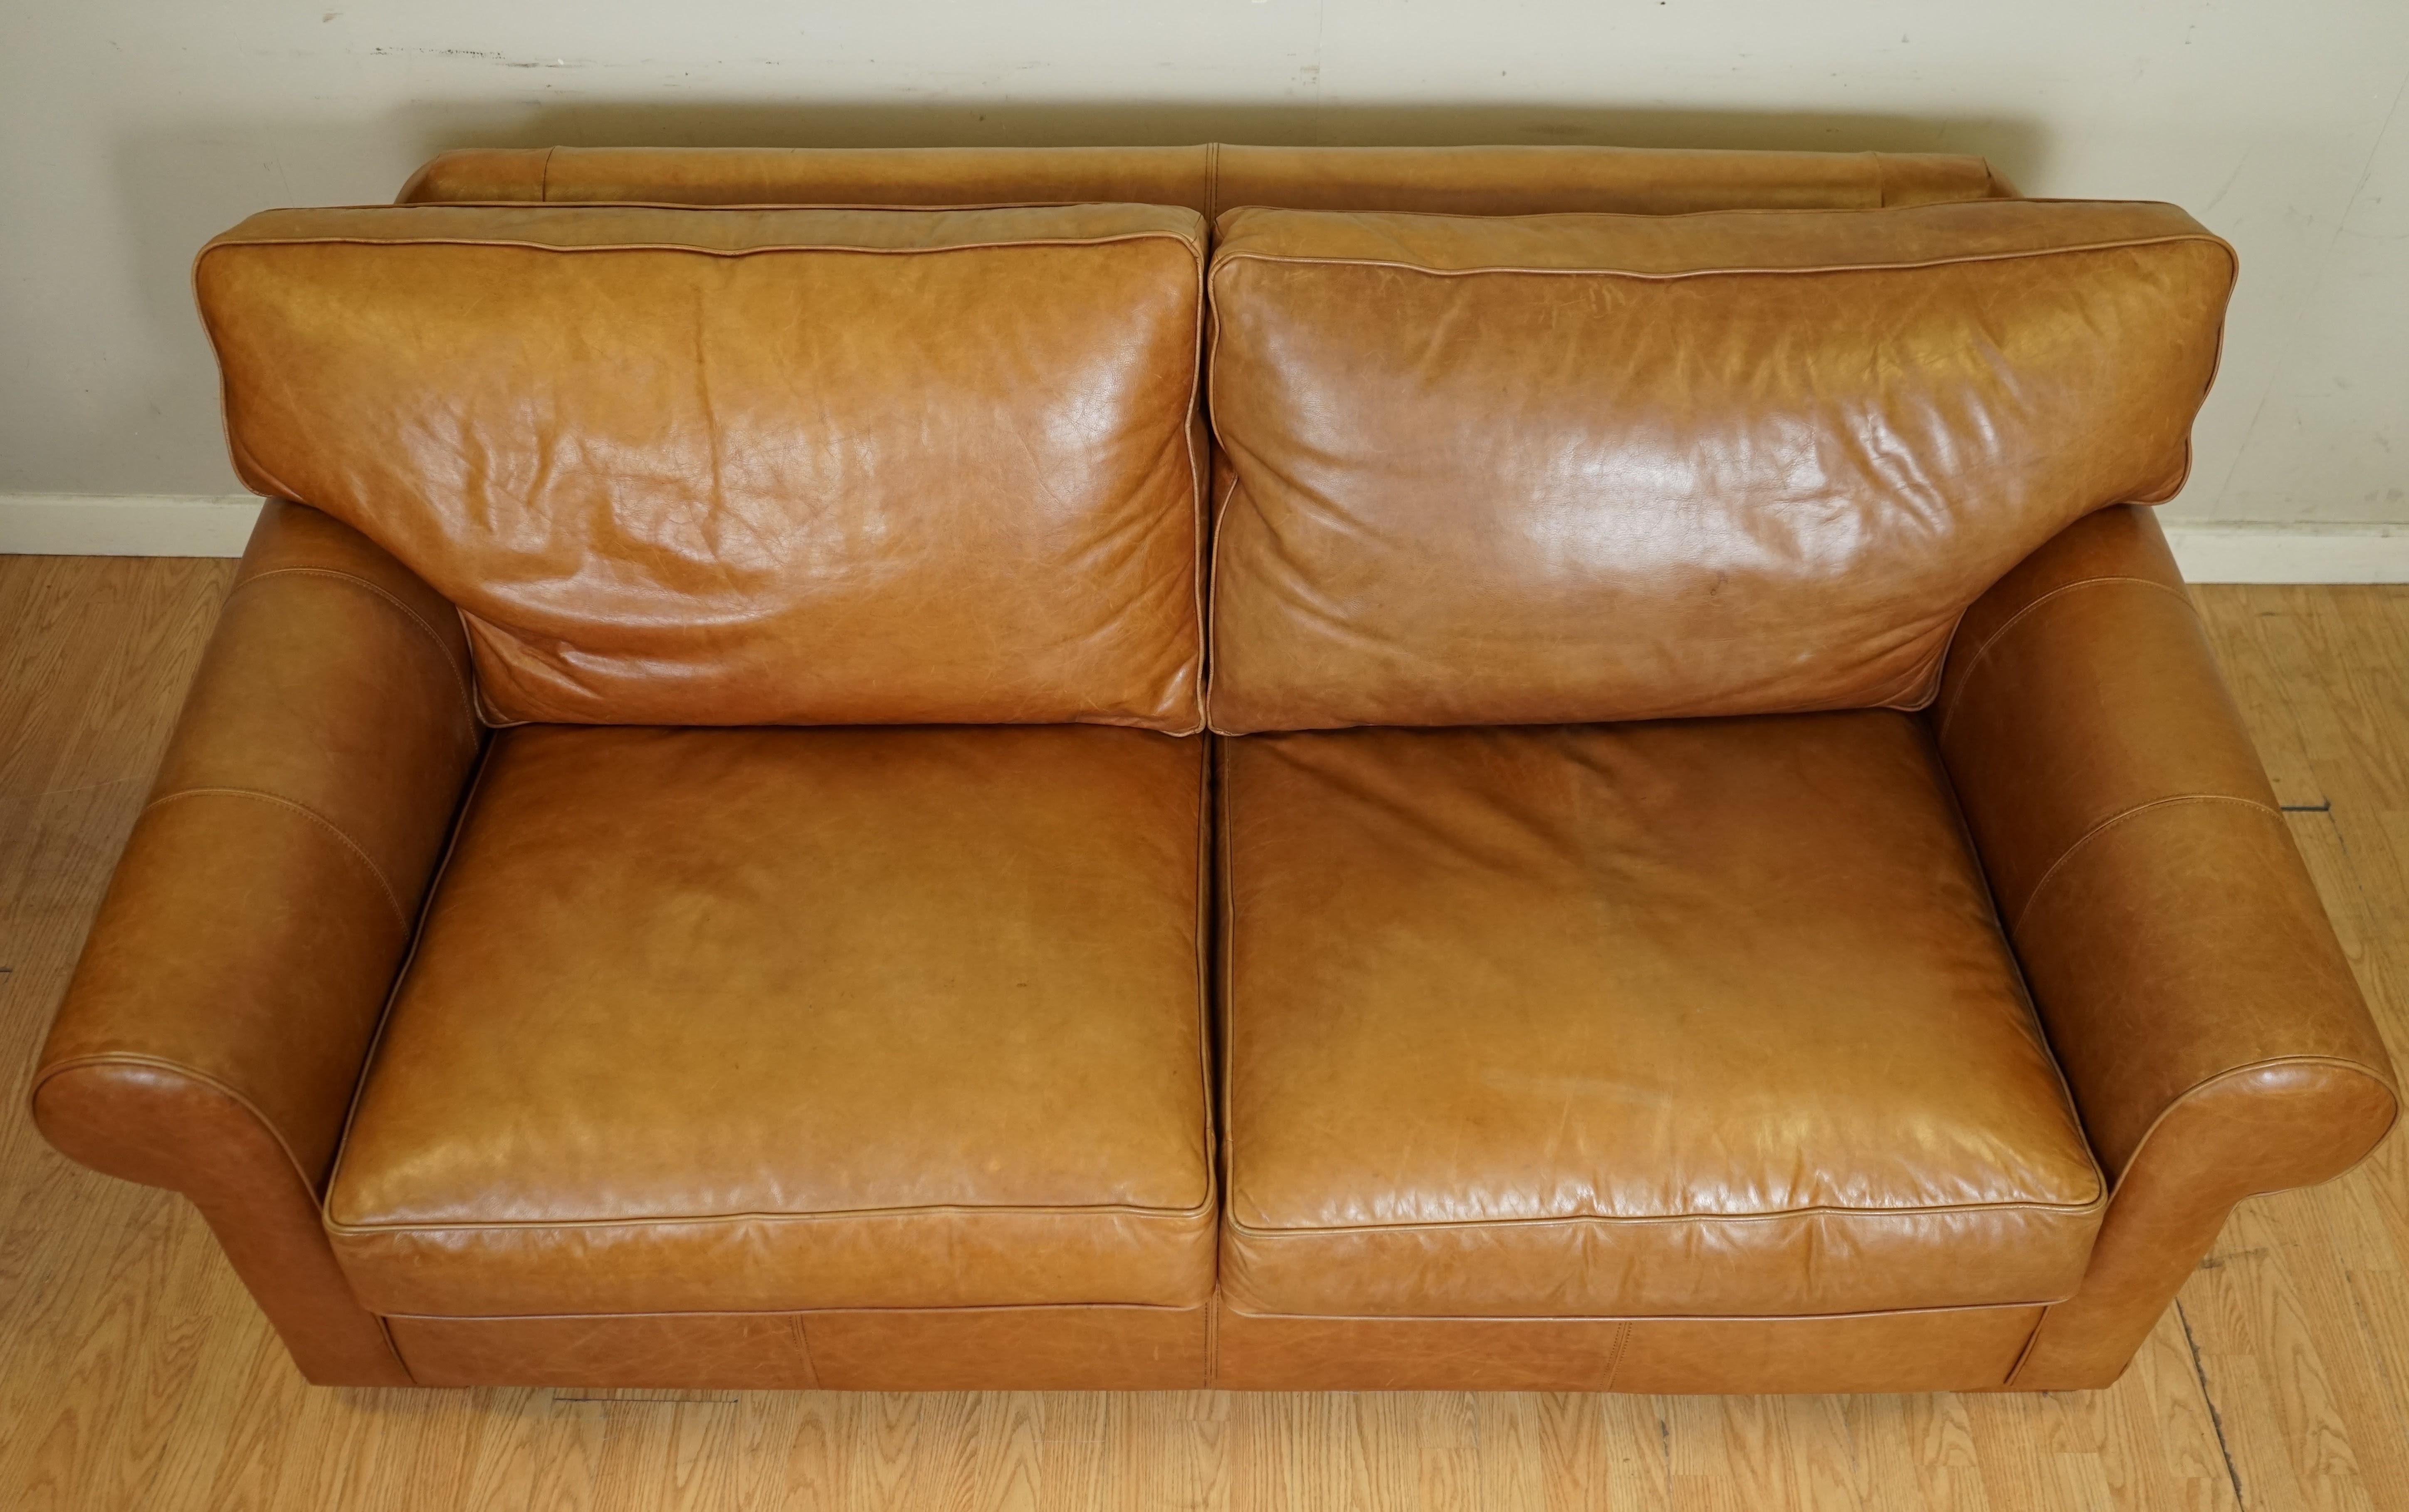 Hand-Crafted Sumptuous Multiyork Buttery Soft Tan Leather Two Three Seater Sofa